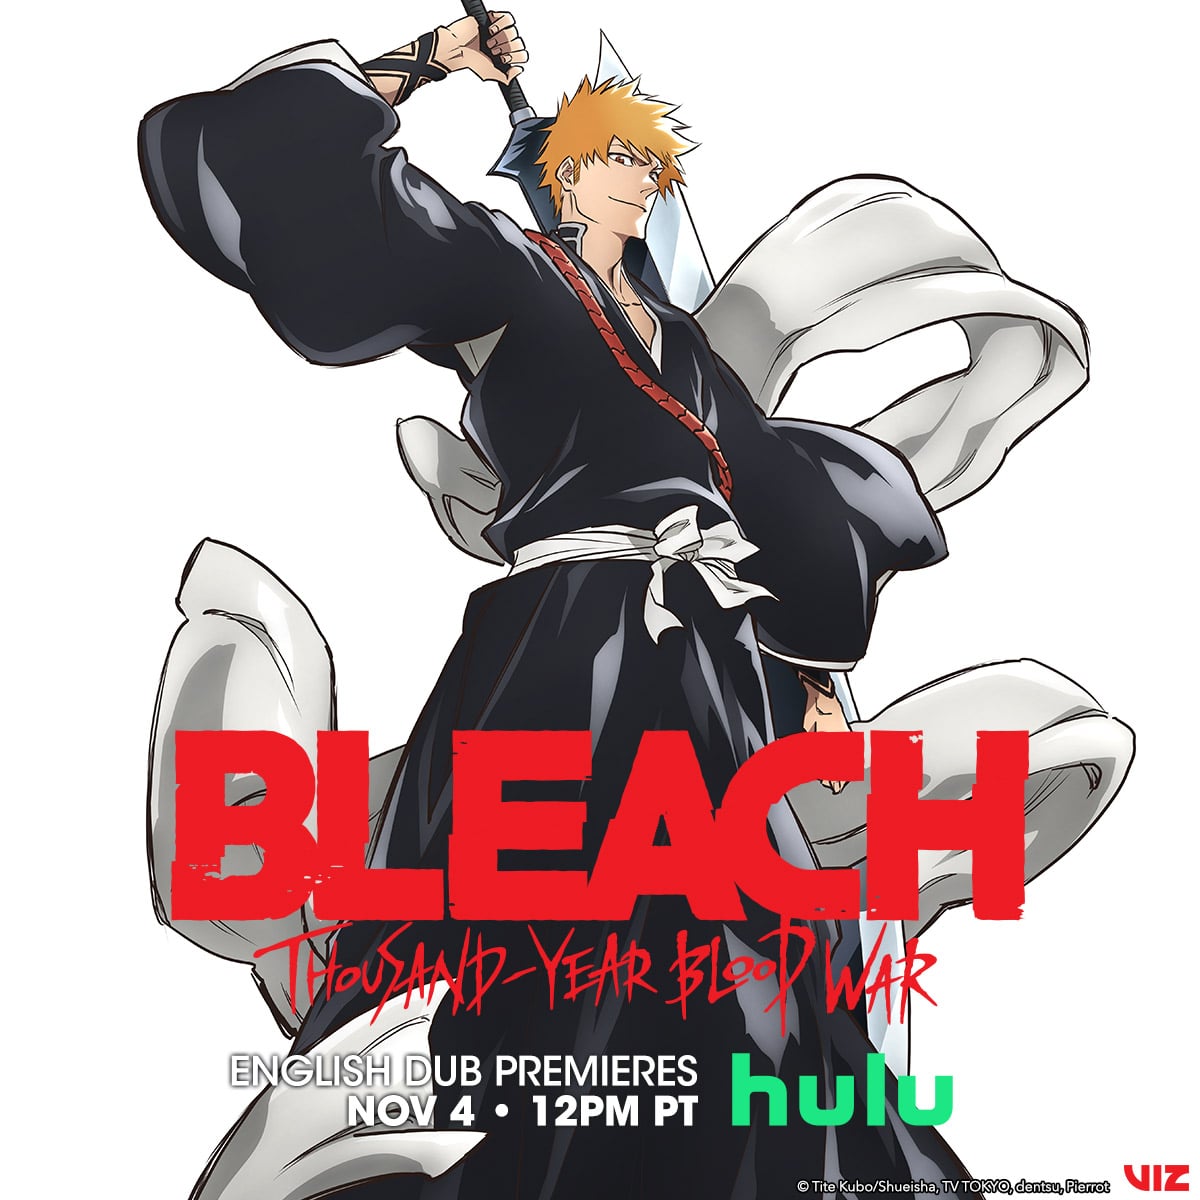 English Dubbed Versions Of “Bleach: Thousand-Year Blood War” Coming To Hulu  – What's On Disney Plus